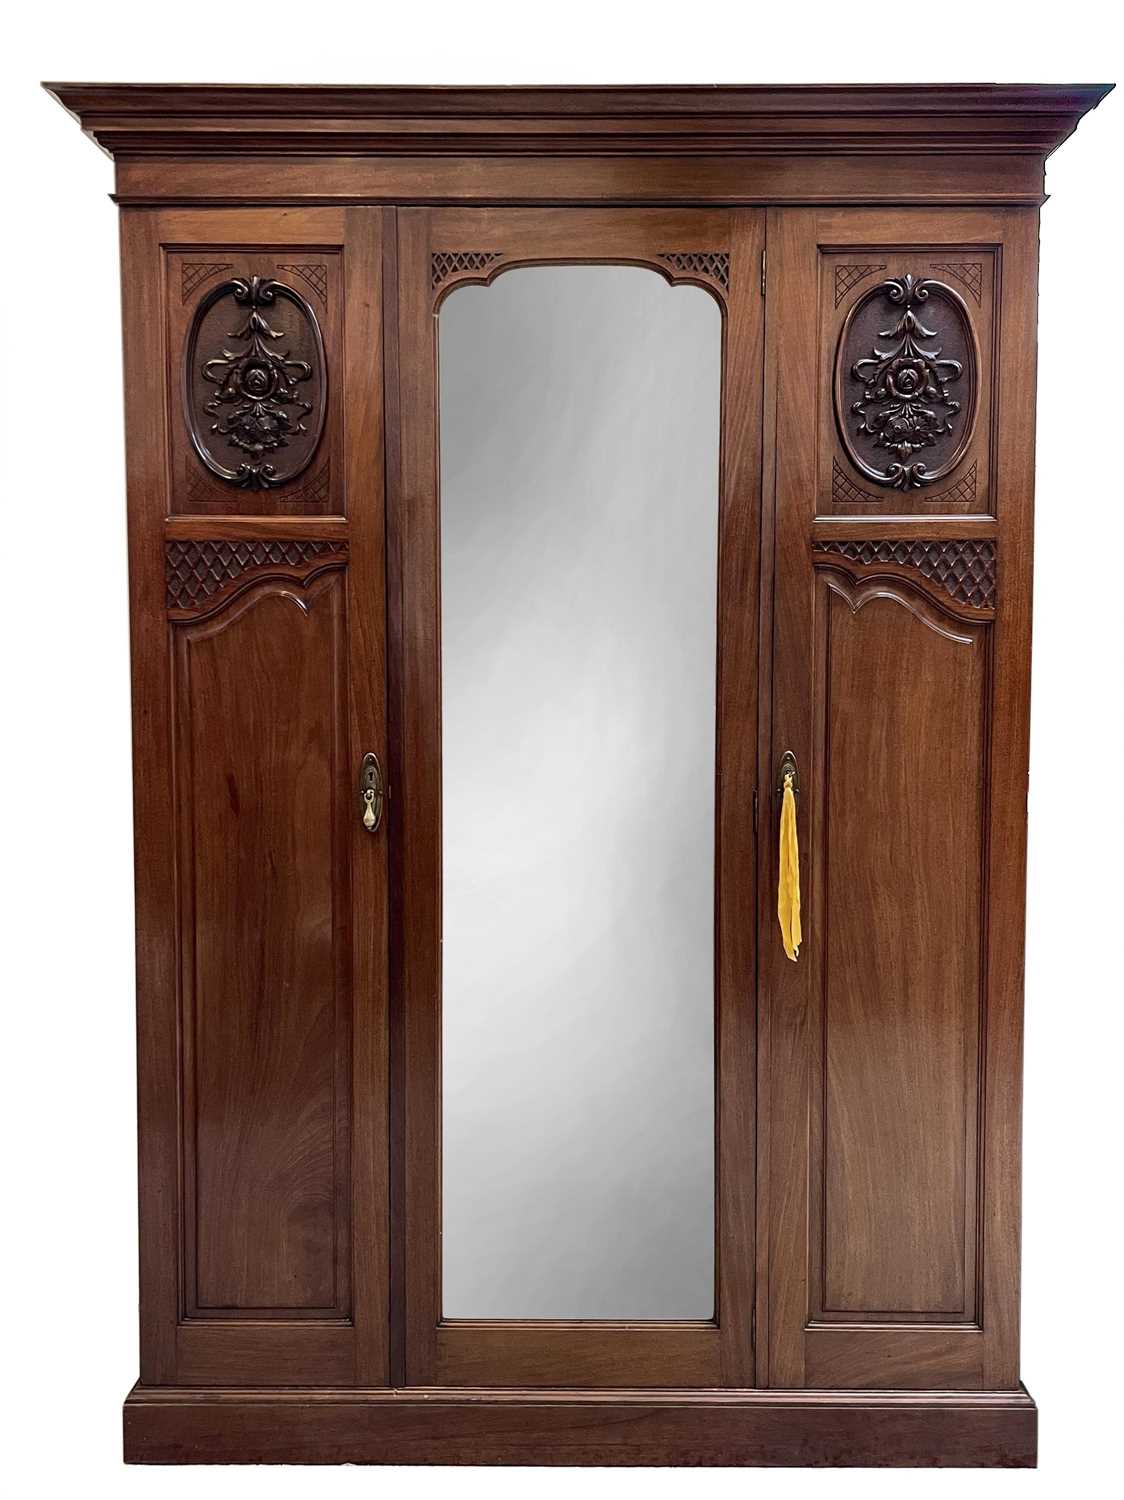 A late Victorian walnut triple wardrobe, with floral carved and mirrored panels enclosing hanging